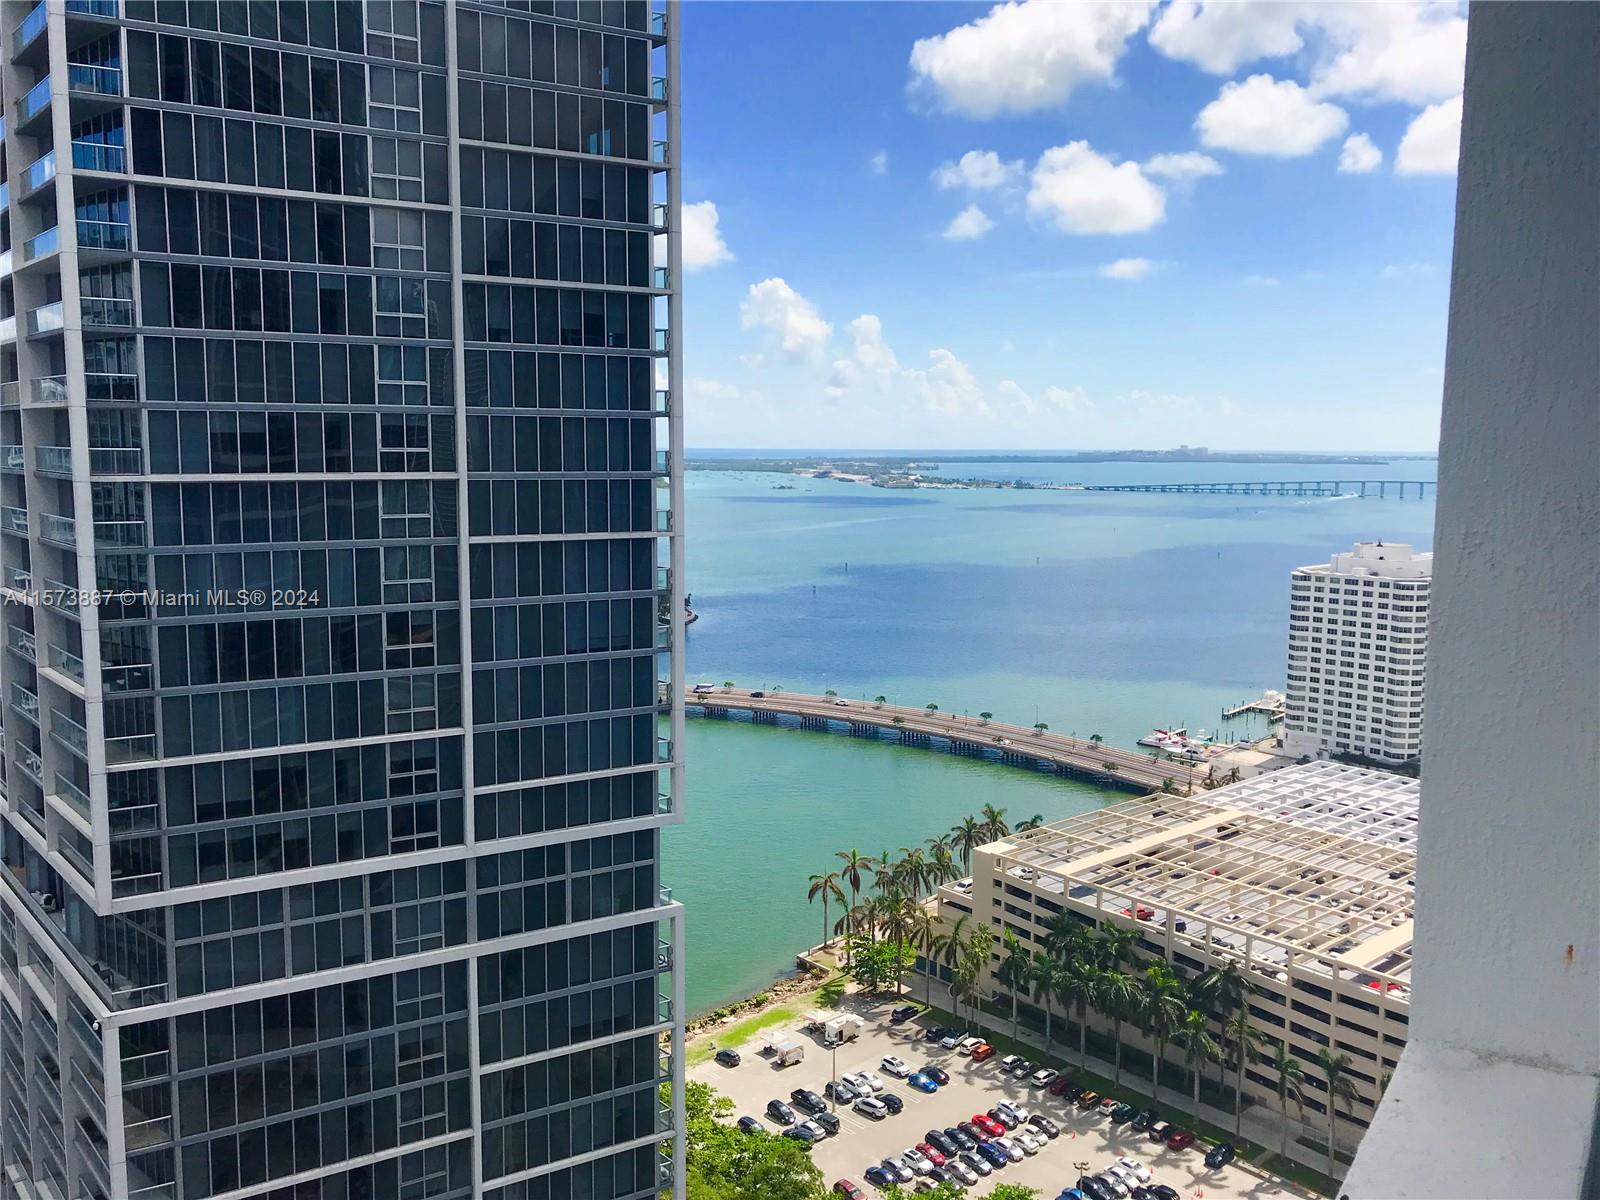 BEAUTIFUL 1/1 UNIT IN THE HEART OF BRICKELL WITH WHITE CERAMIC FLOORS, STAINLESS STEEL APPLIANCESAND AMAZING VIEWS OF THE POOL, BISCAYNE BAY AND MIAMI RIVER. LUXURY LIFESTYLE BUILDING; AN URBANOASIS, JUST STEPS FROM THE FINANCIAL DISTRICT AND DOWNTOW N MIAMI AND A SHORT DRIVE FROM SOUTHBEACH, CORAL GABLES, AND THE DESIGN DISTRICT. FIVE STAR AMENITIES INCLUDING POOL, FITNESS CENTER,SPA, VALET, 24 HOUR CONCIERGE AND MUCH MORE.